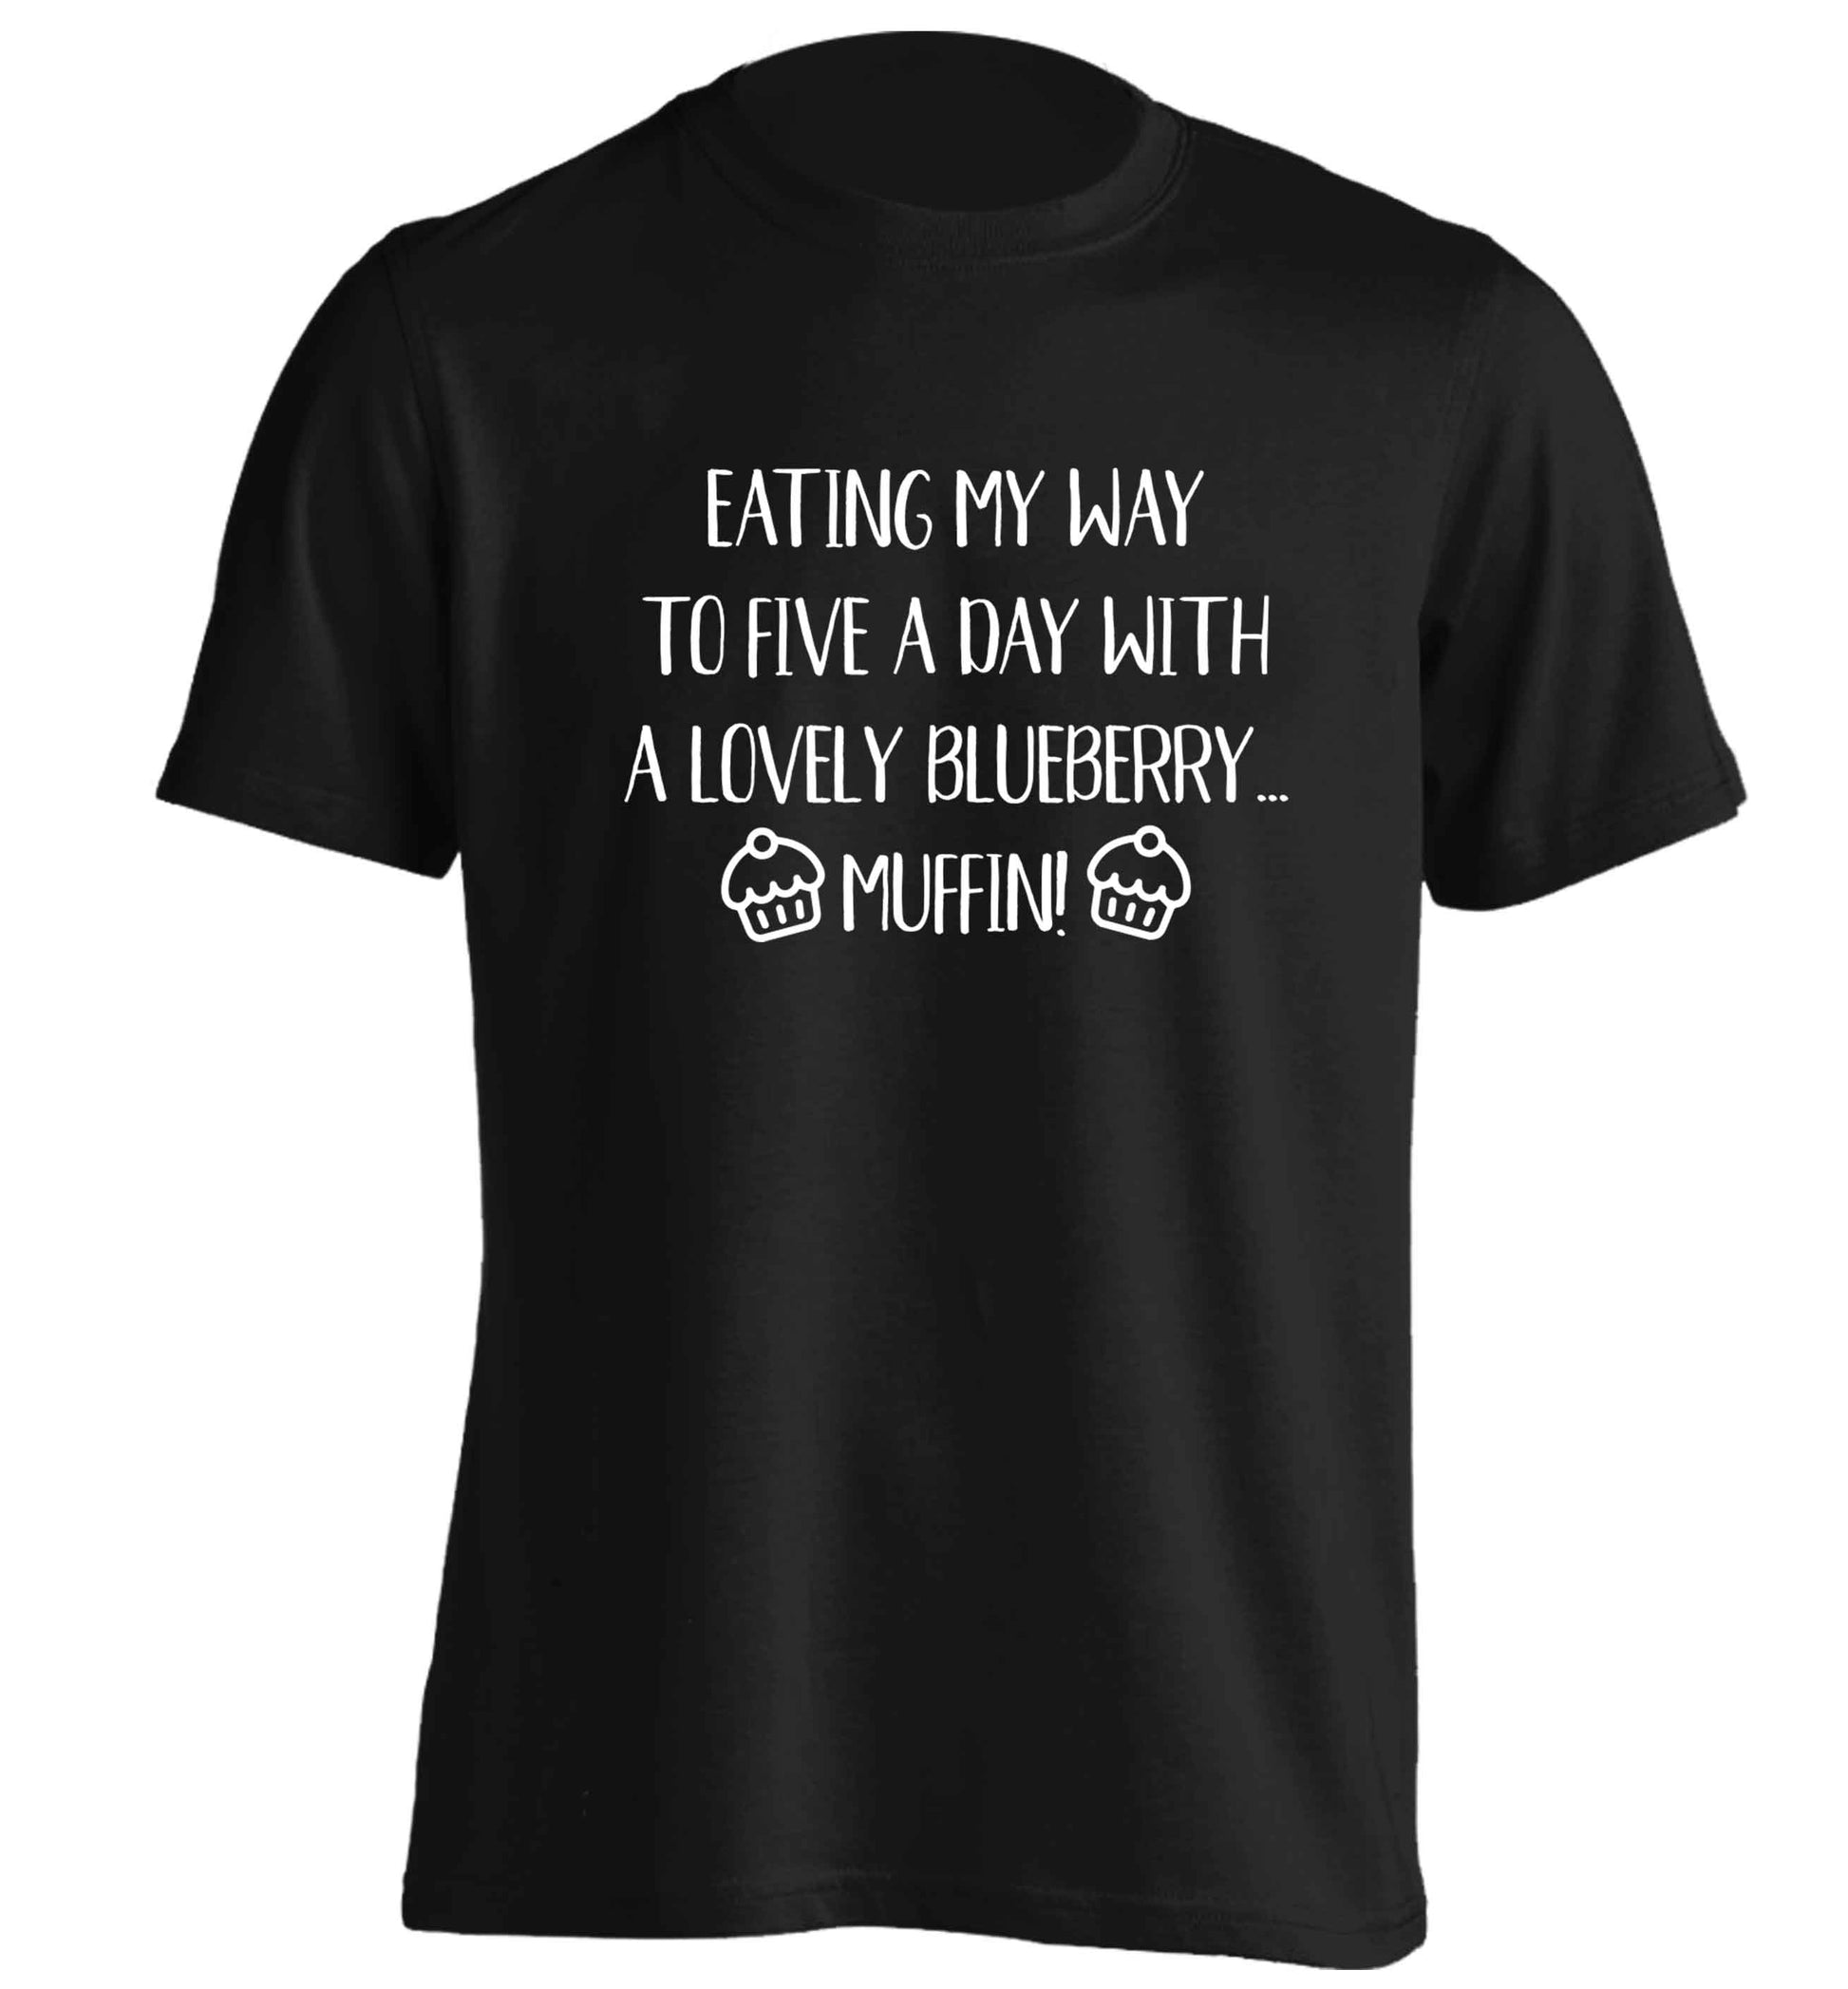 Eating my way to five a day with a lovely blueberry muffin adults unisex black Tshirt 2XL